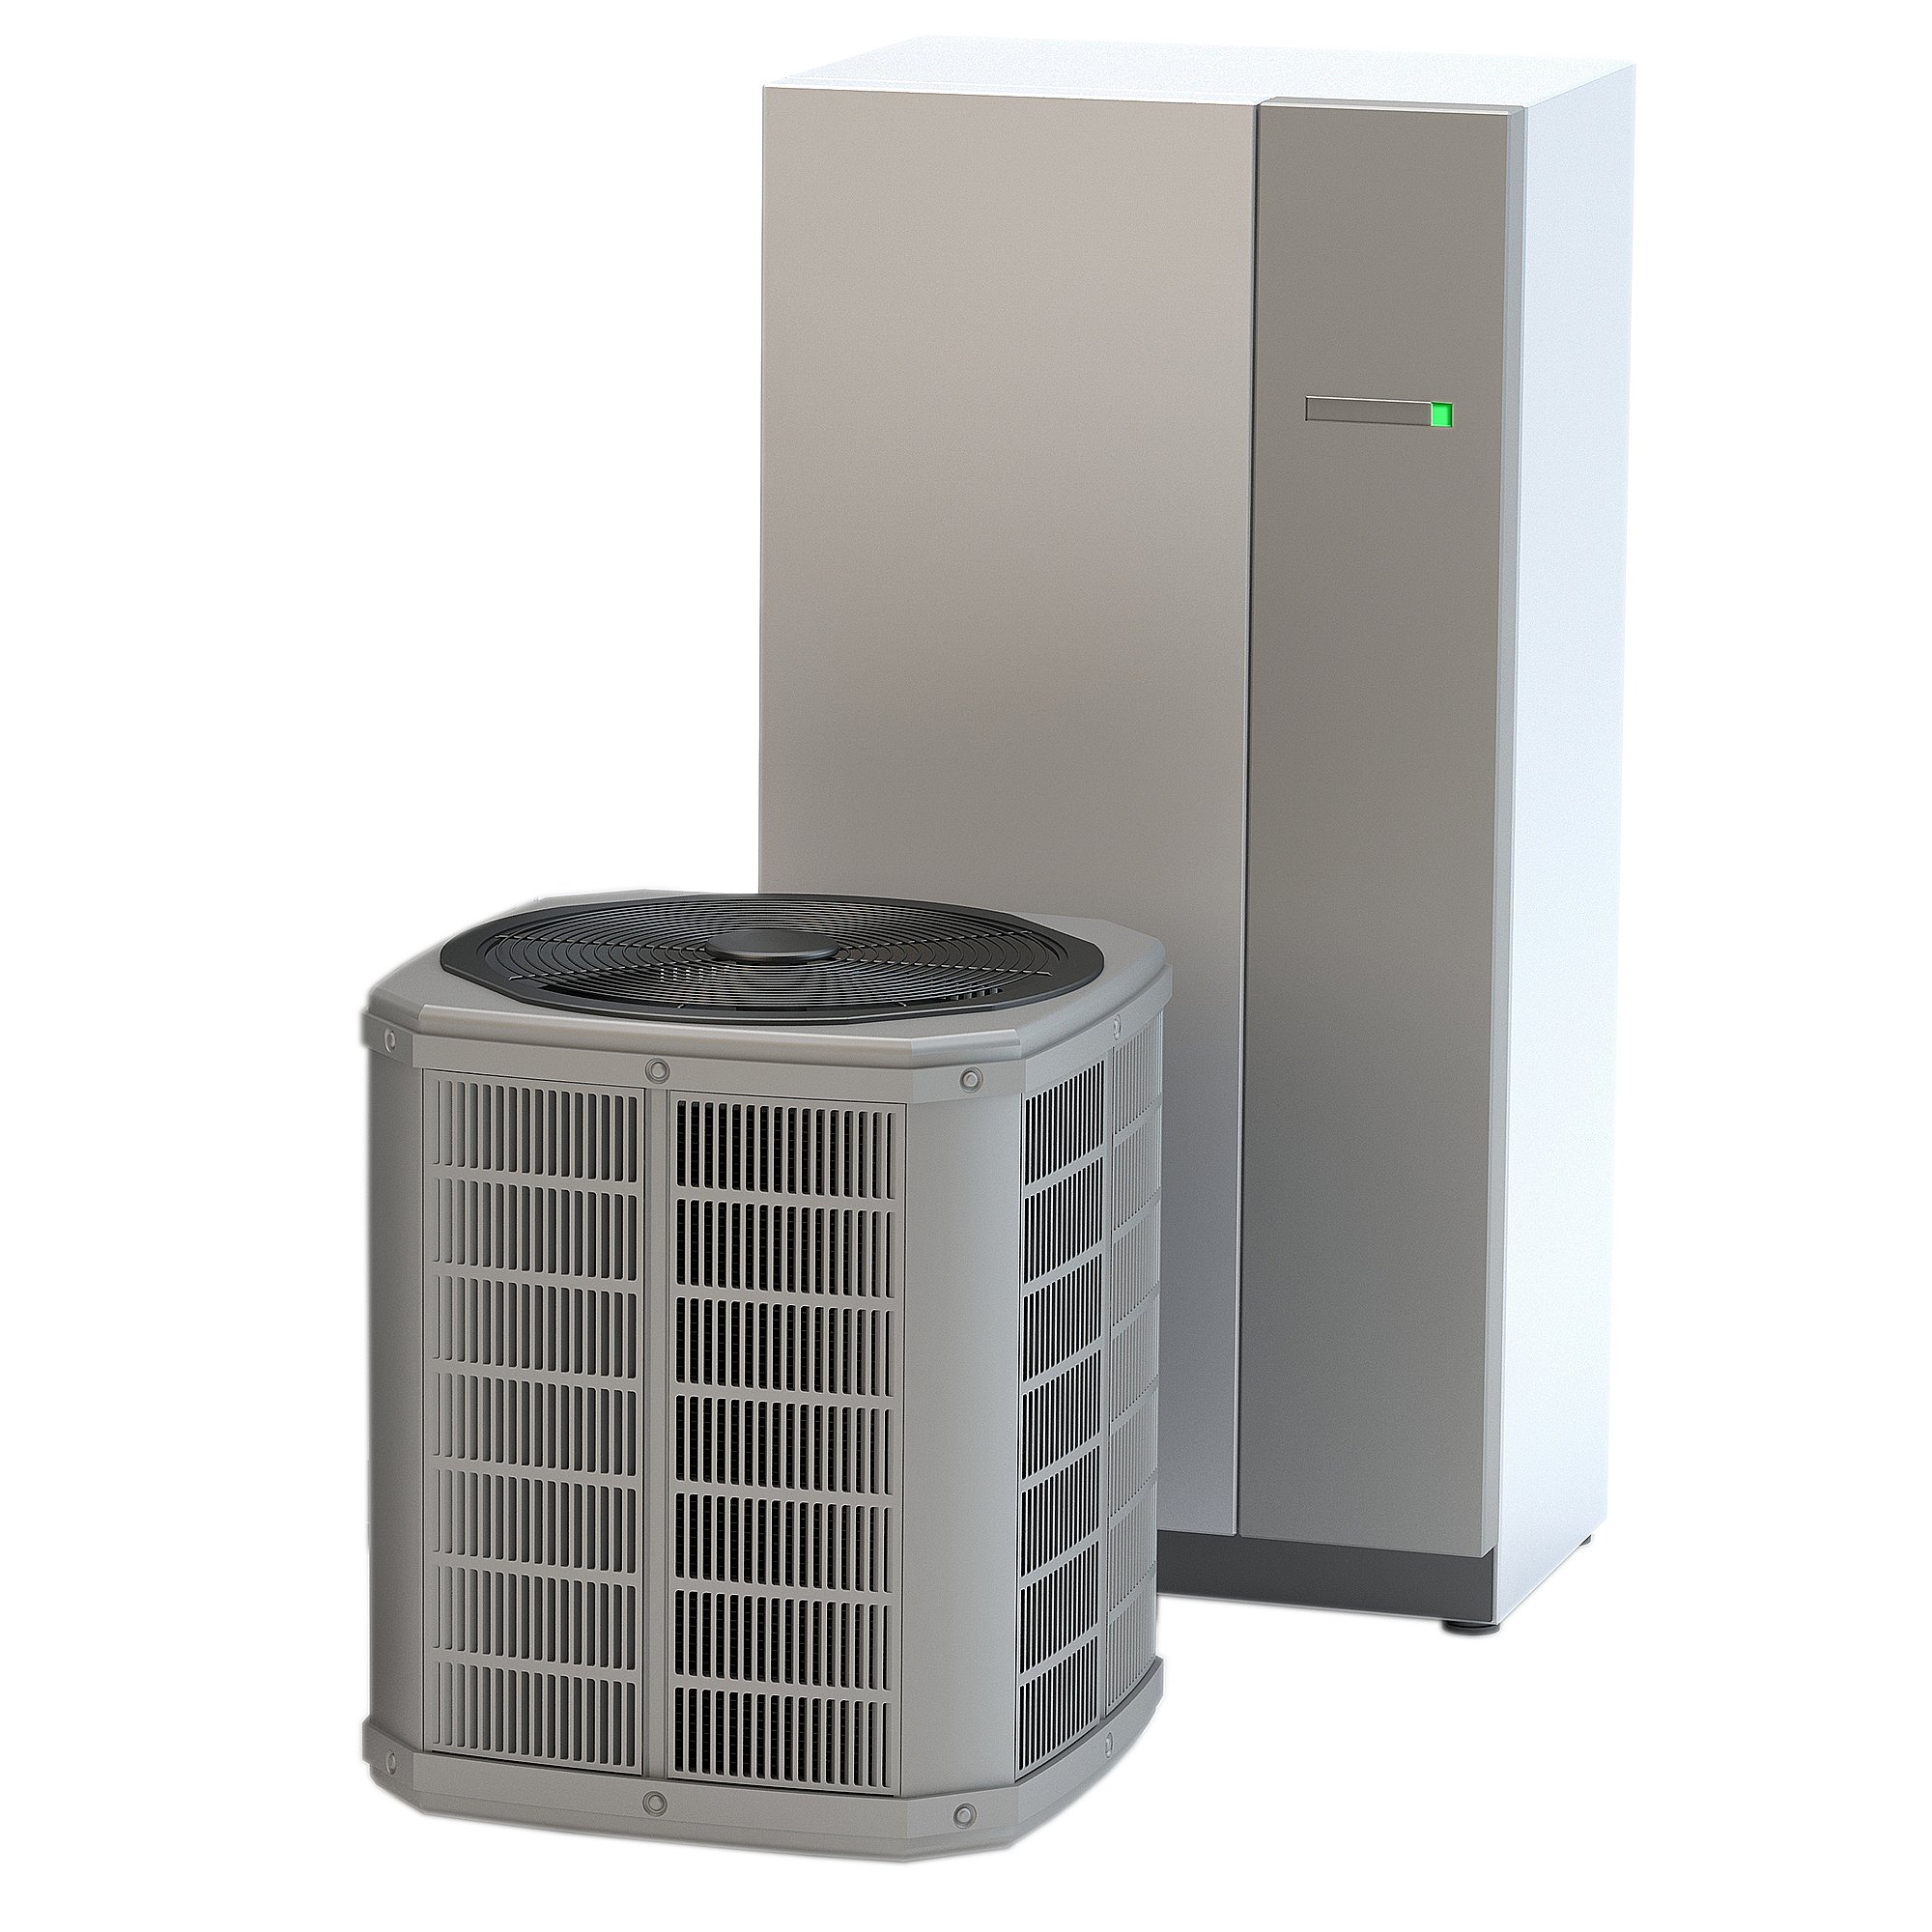 Heating & Cooling Combined Units